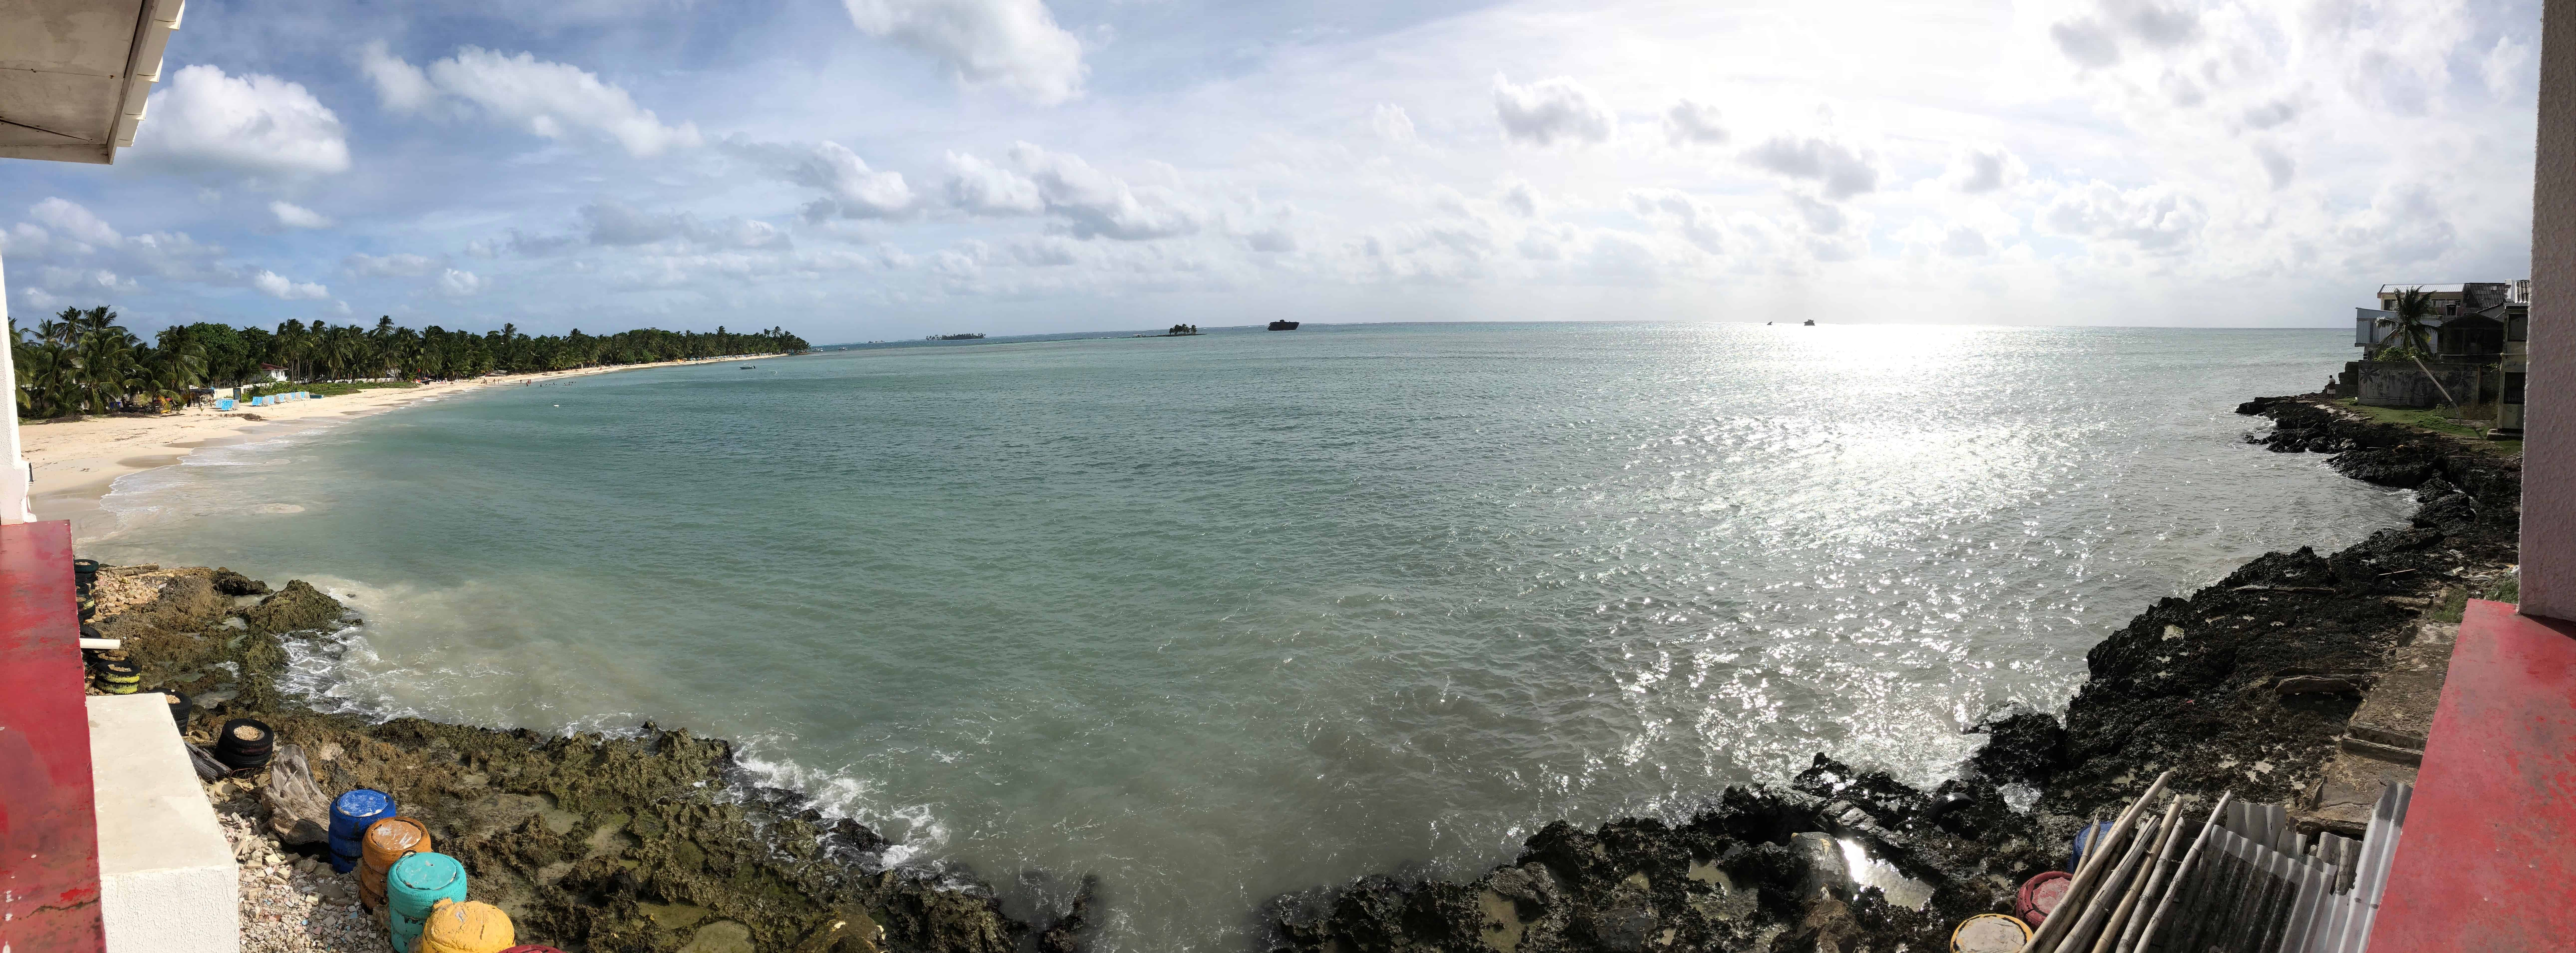 The view from Rocky Cay Bay in San Andrés, Colombia